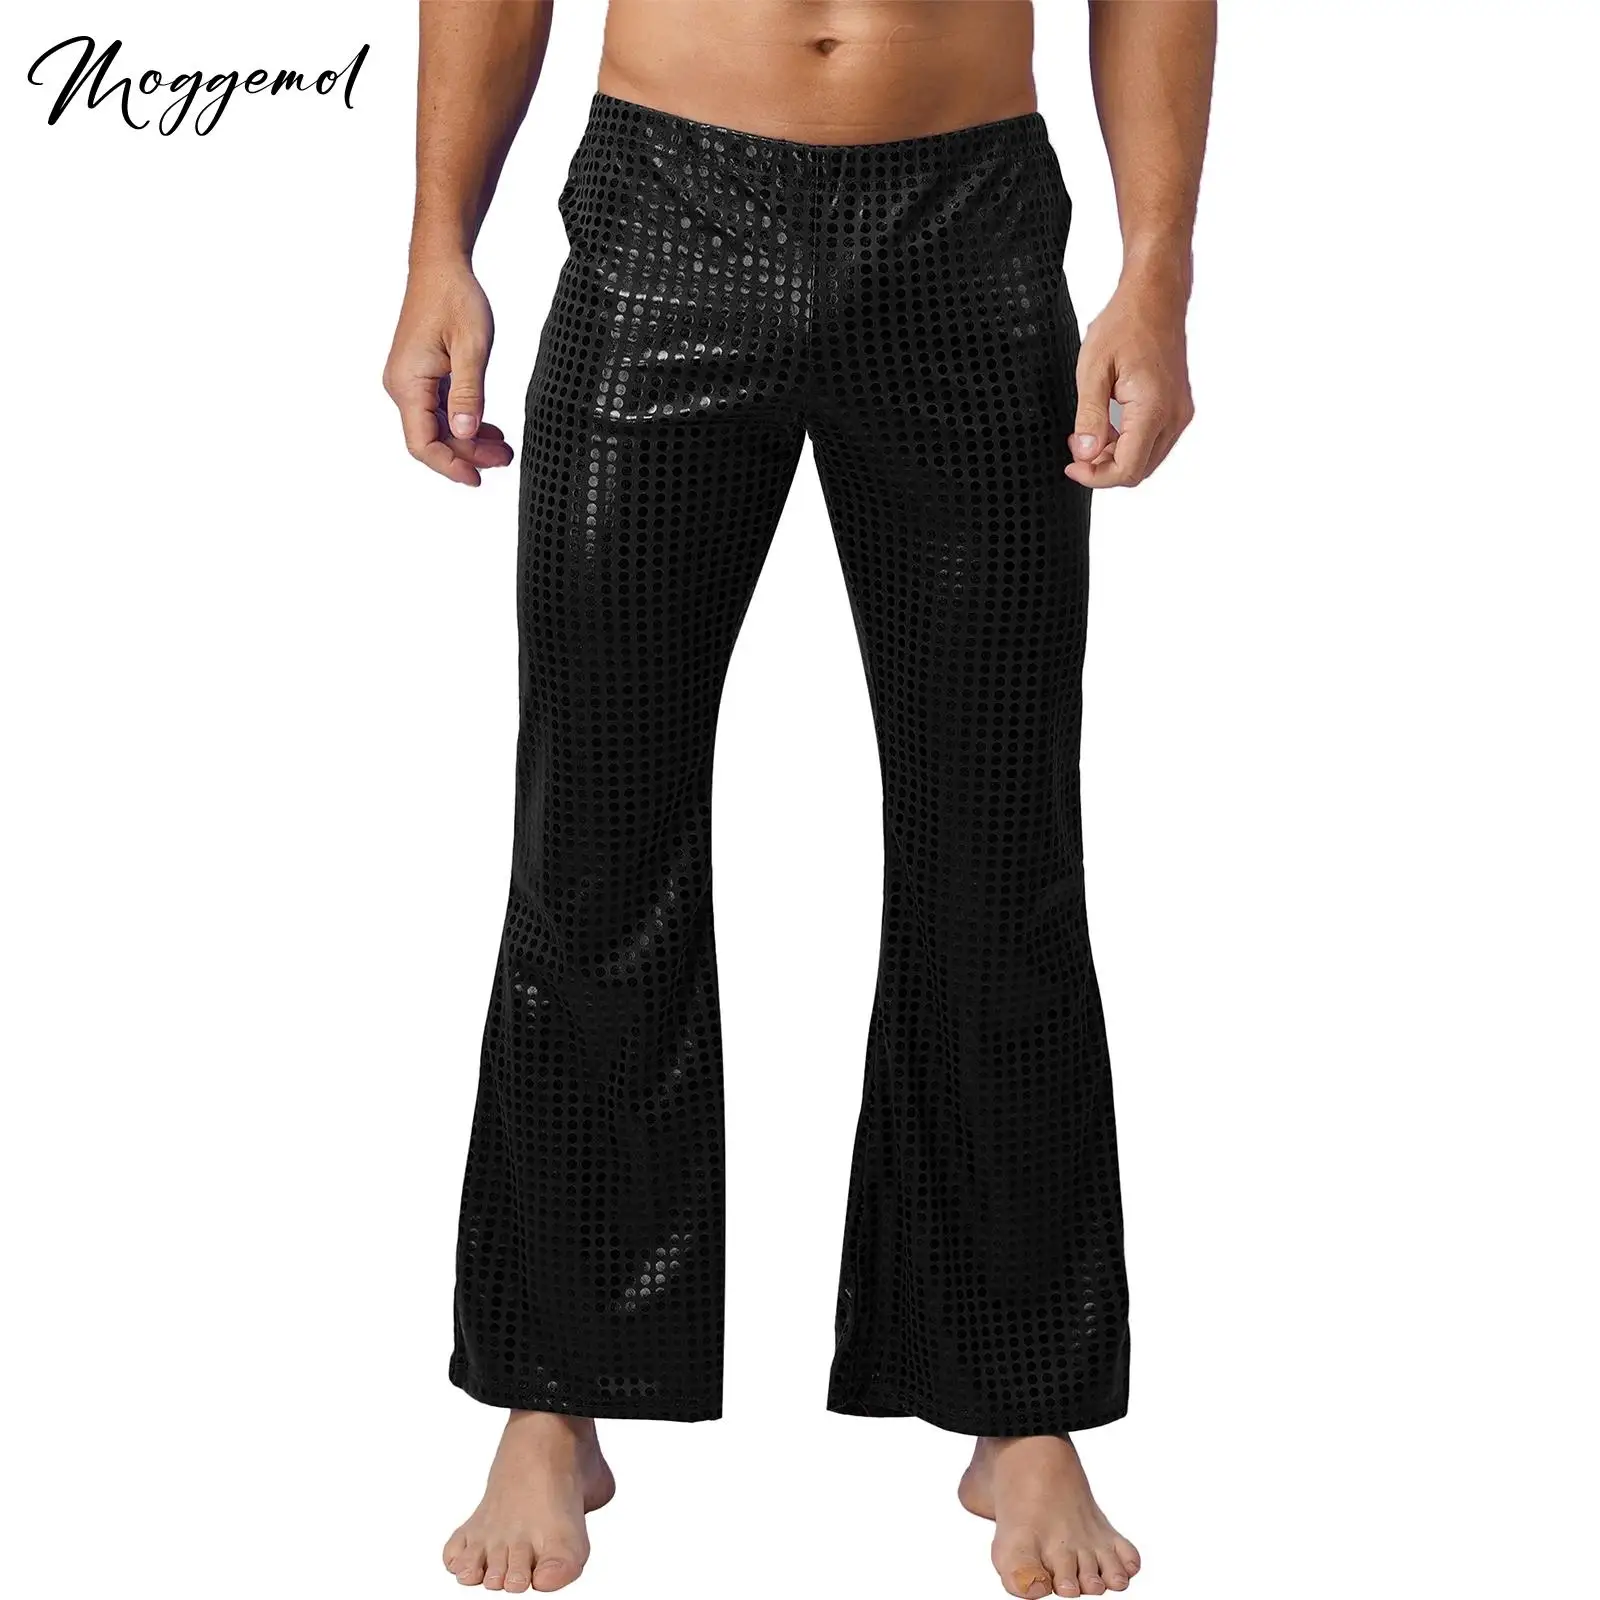 

Mens 70s Disco Pants Party Stage Performance Costumes Bell Bottom Pants Elastic Waistband Flared Pants Shiny Sequins Long Pants